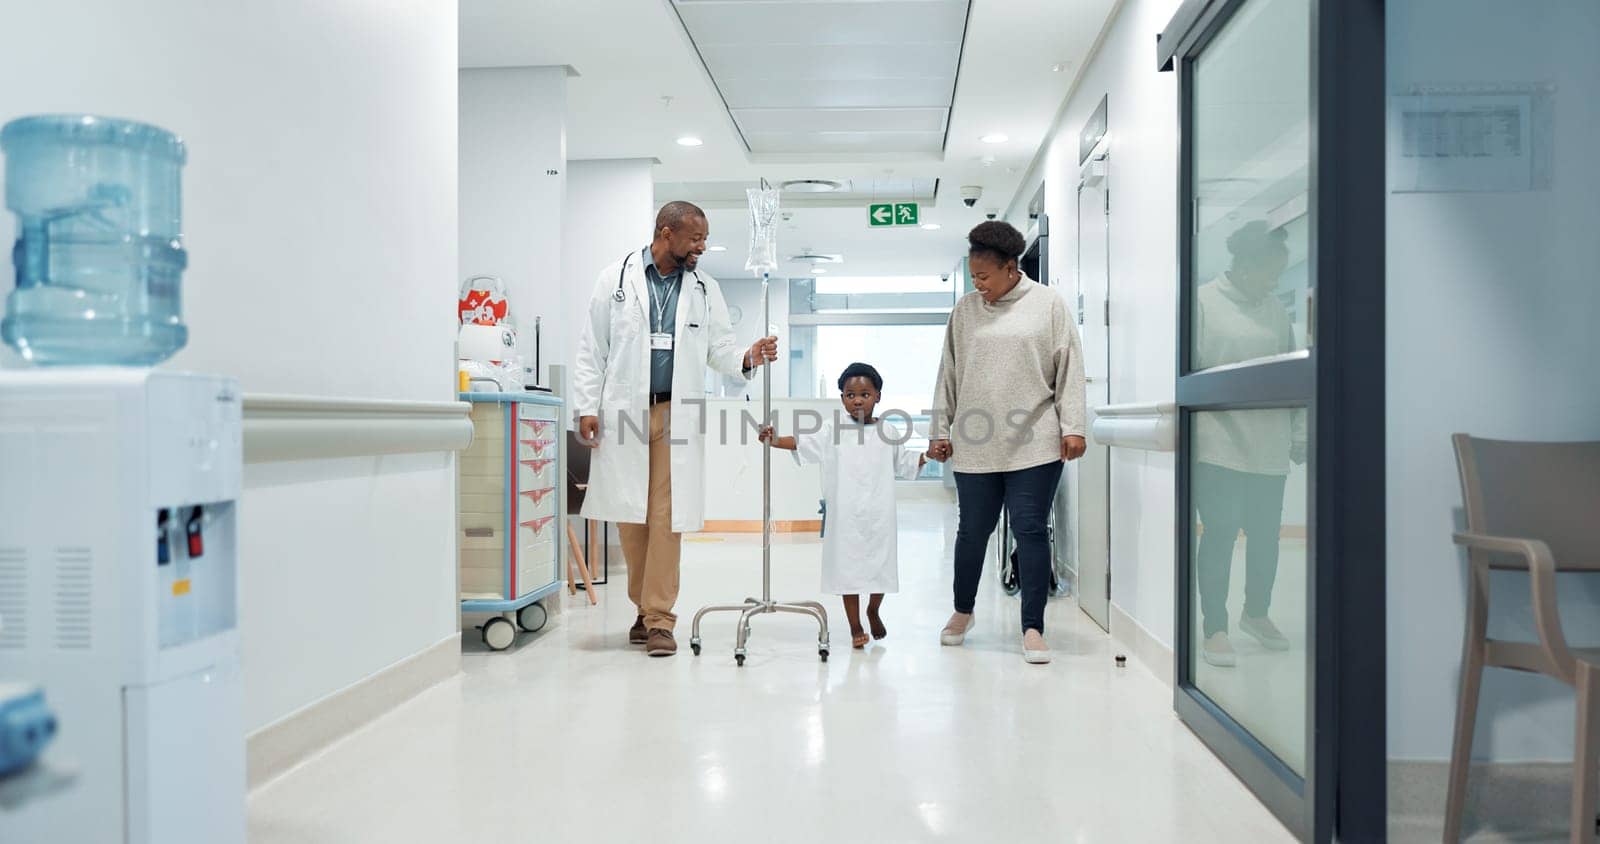 Medical, pediatrician and a doctor walking with a black family in a hospital corridor for diagnosis. Healthcare, communication and consulting with a medicine professional talking to a boy patient.